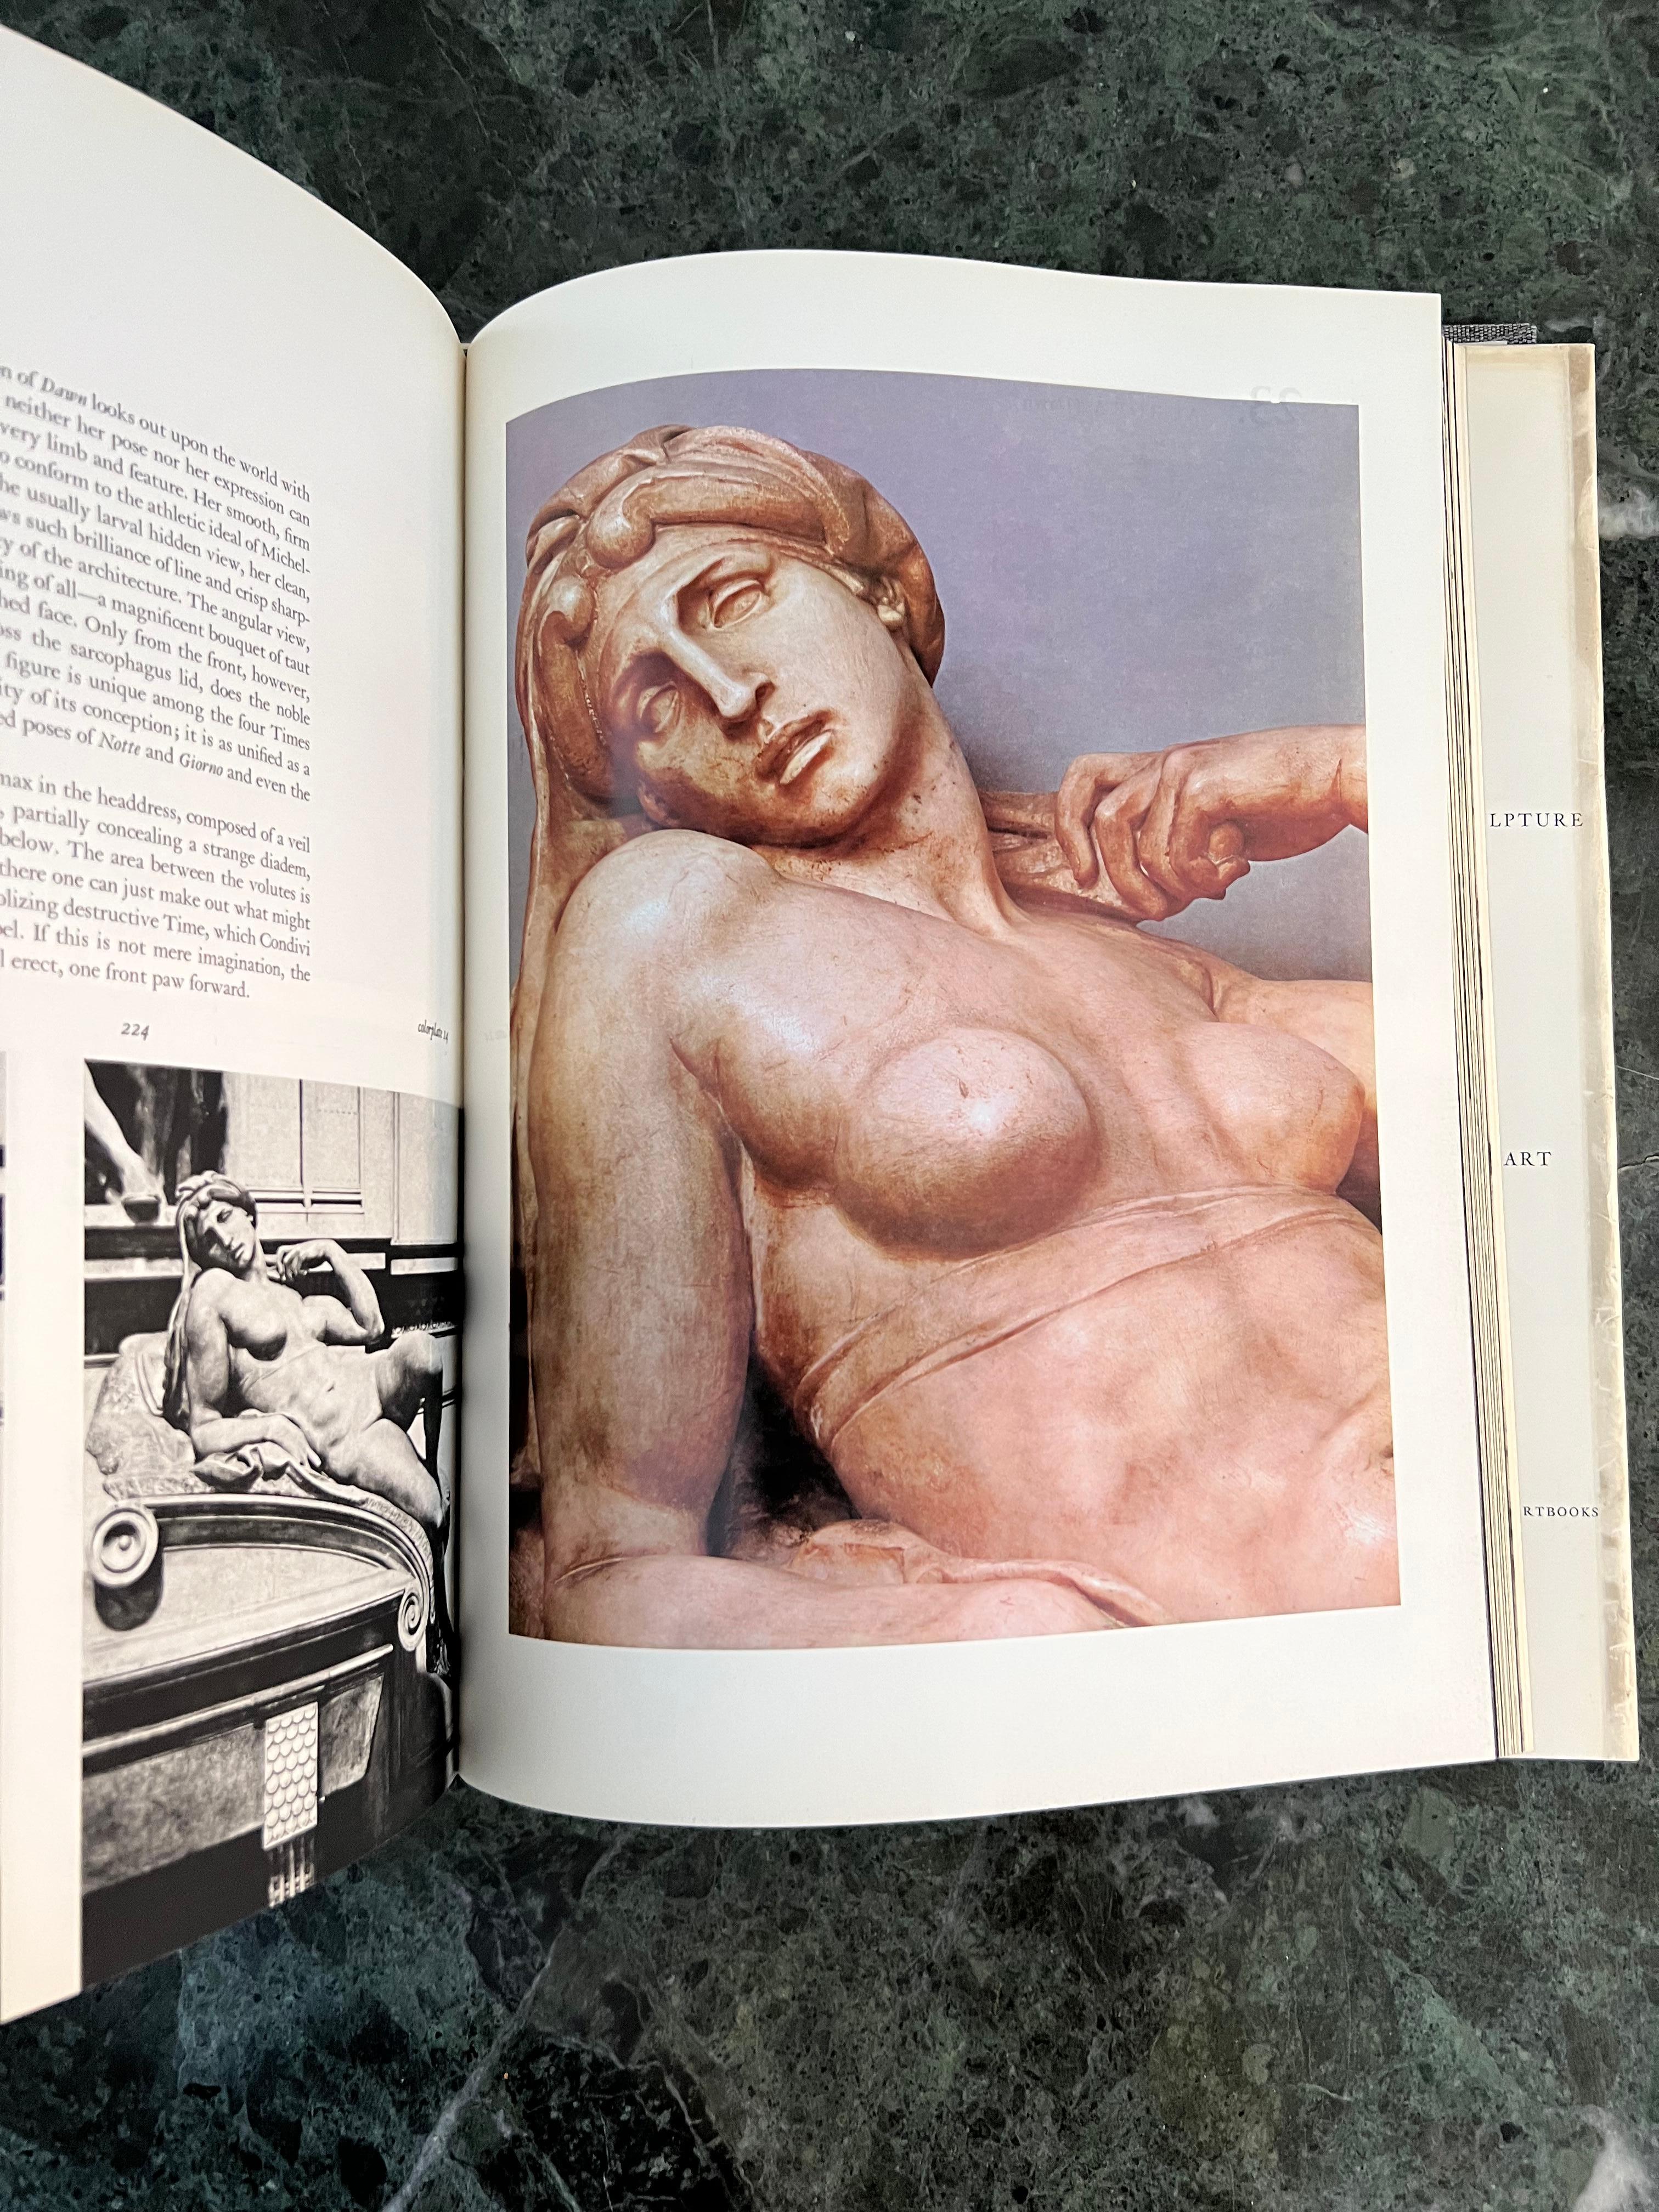 Large Collectible Art Book “Michelangelo: The Complete Sculpture”, 1982 For Sale 7